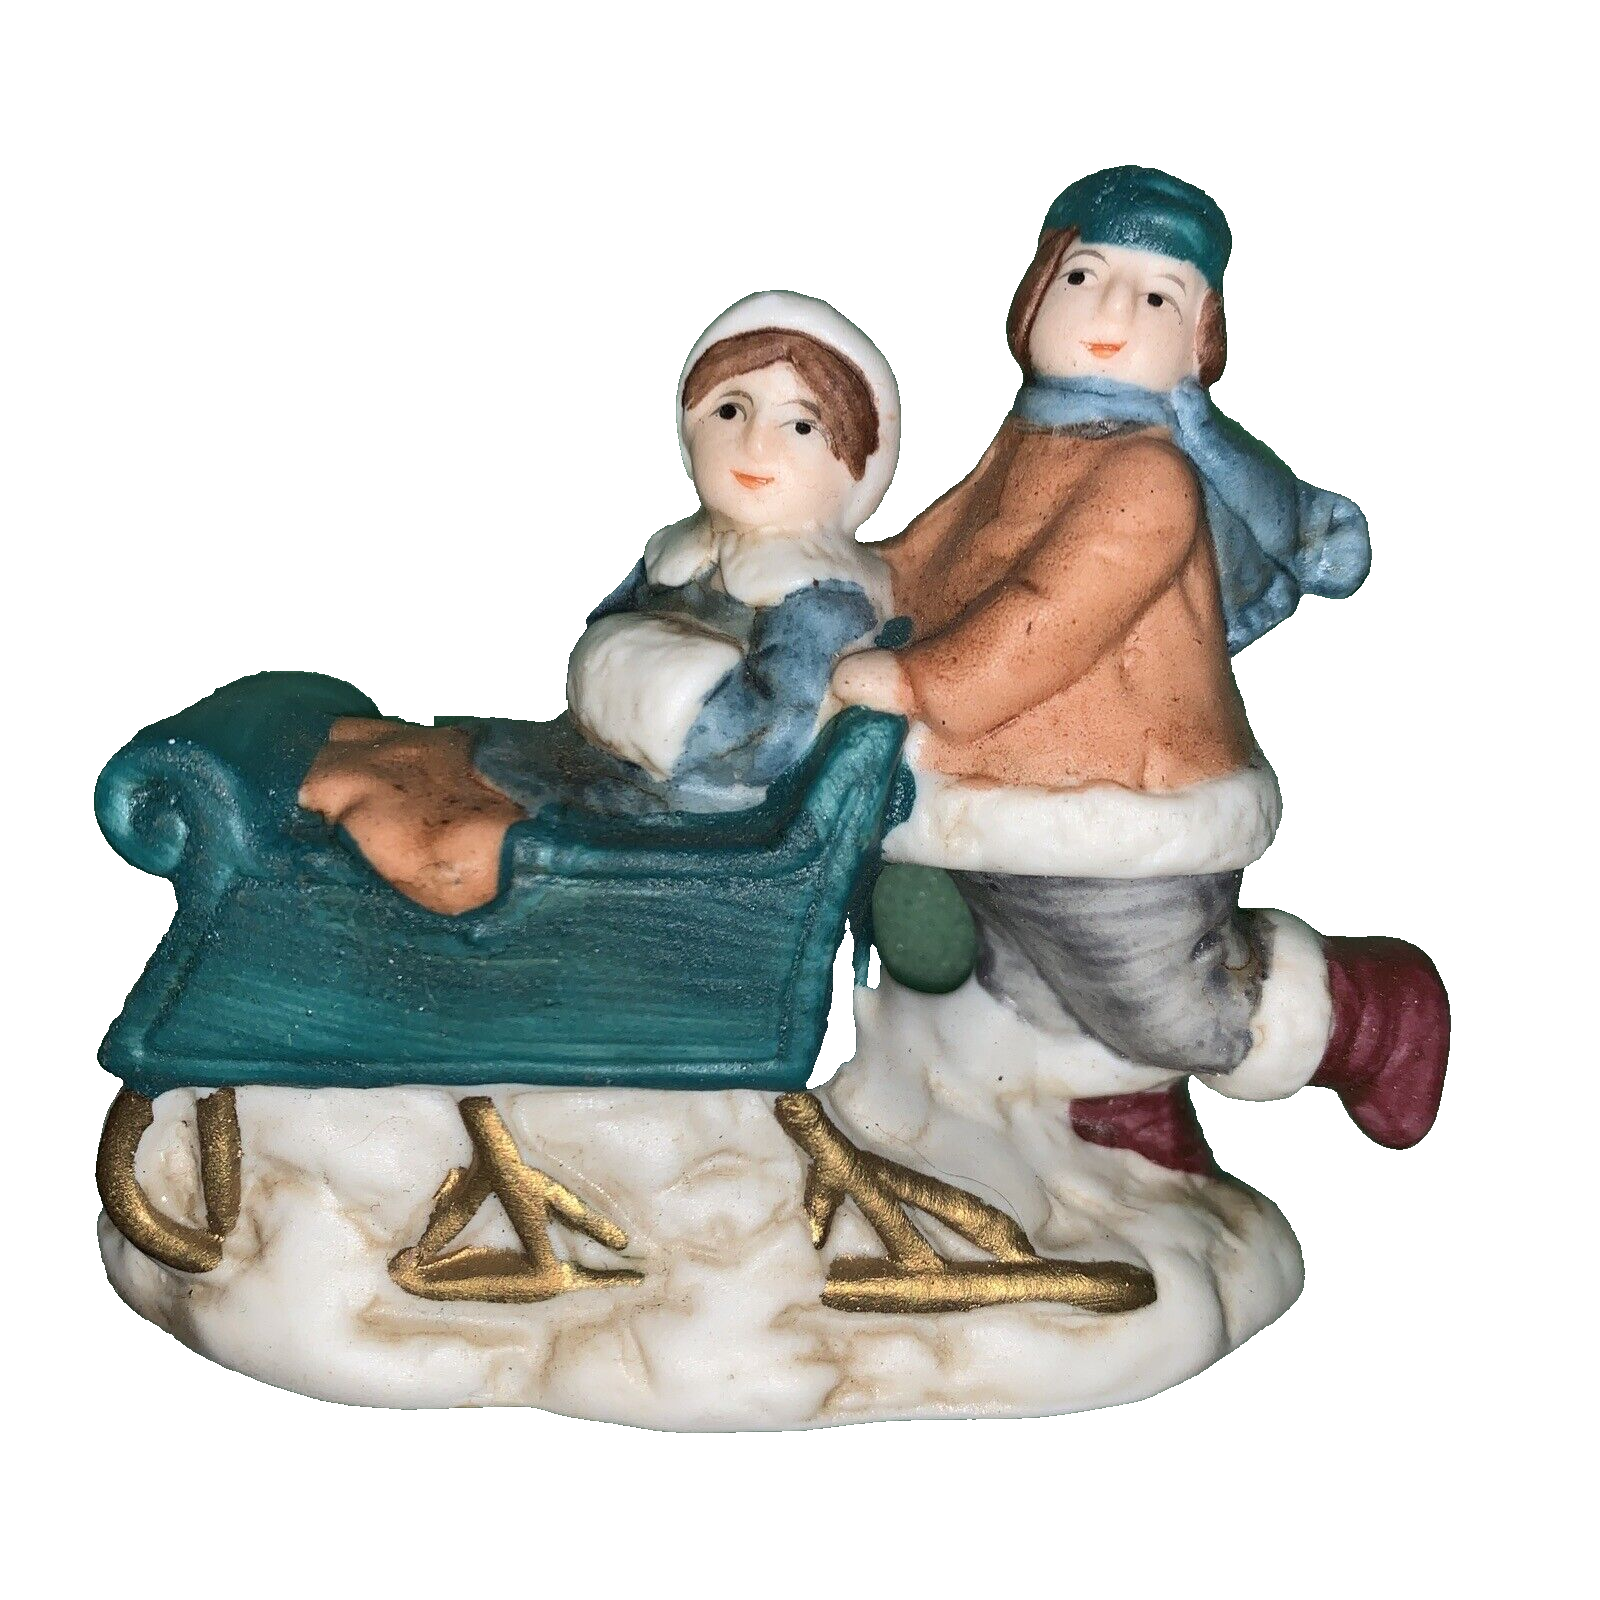 Christmas Village Ornament People On Sled Made in Taiwan - $14.73